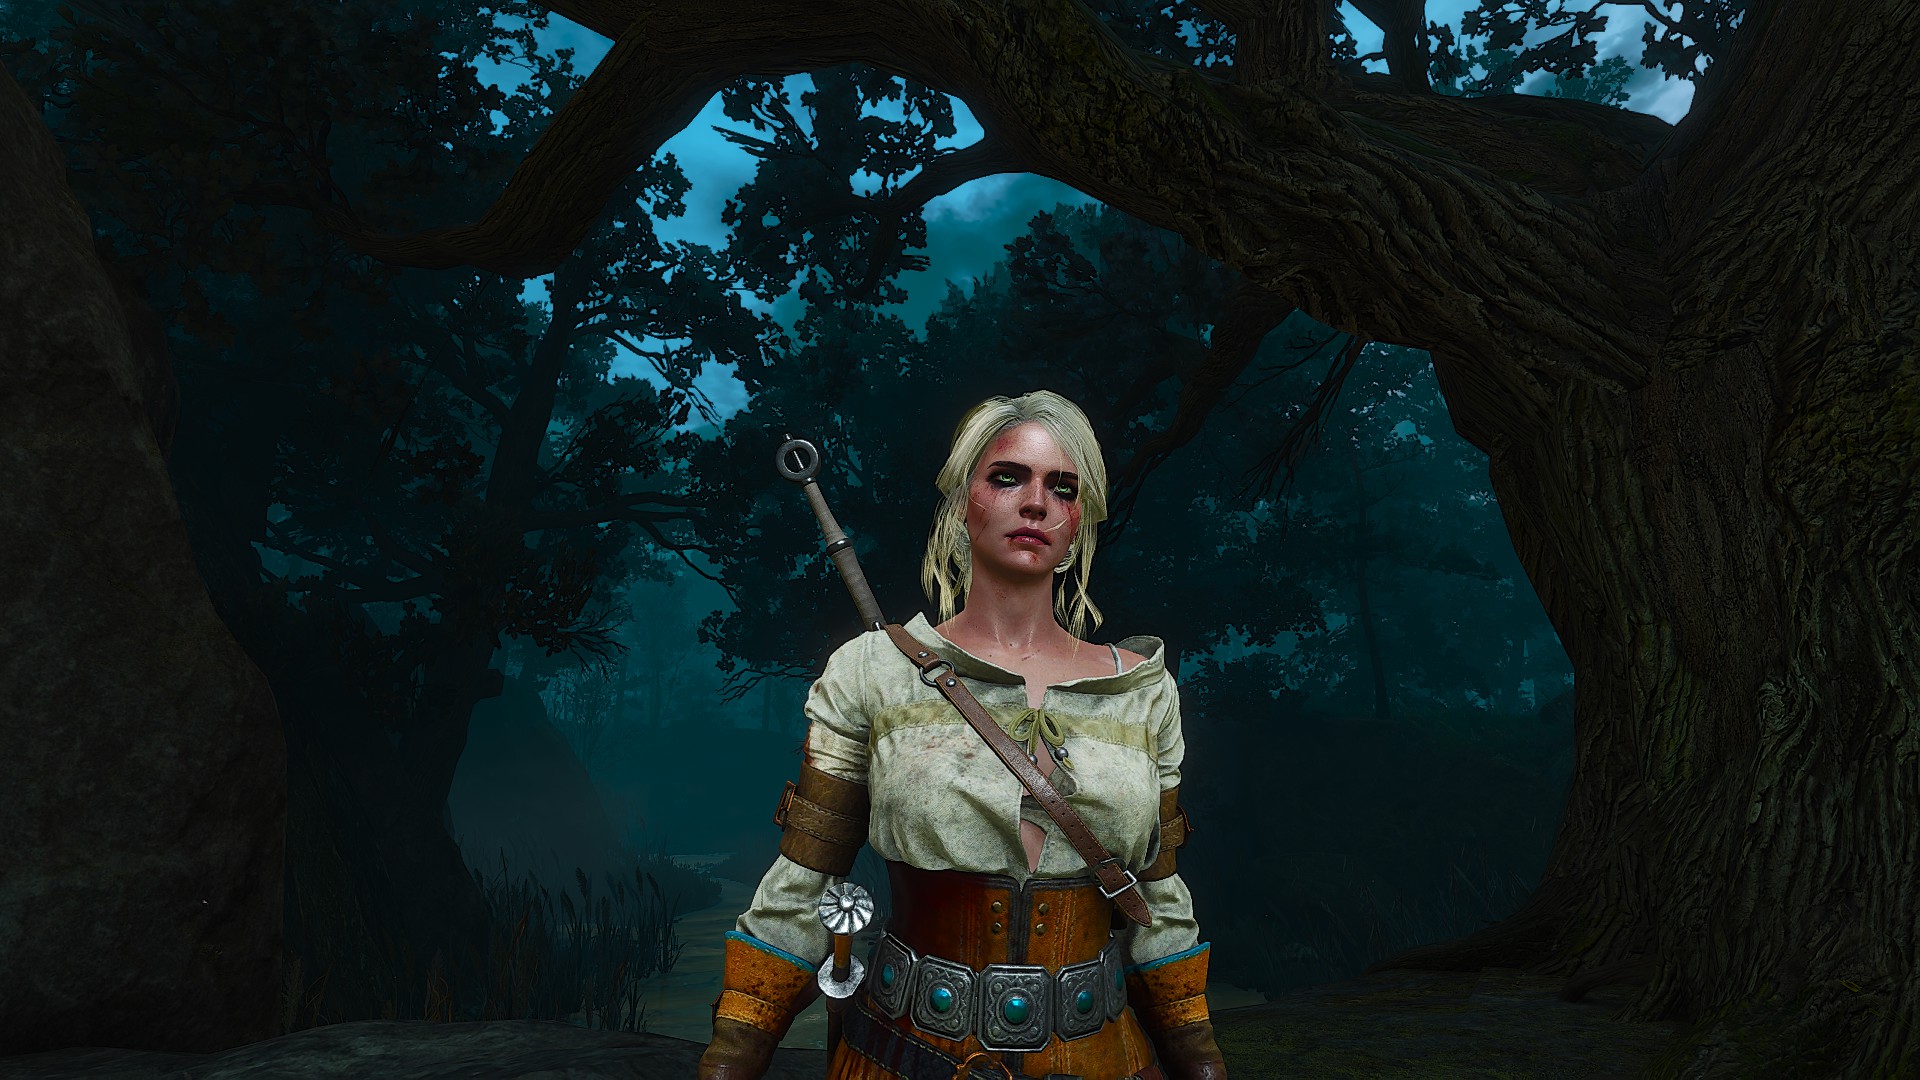 The Witcher 3 Wild Hunt Blood And Wine Cirilla Fiona Elen Riannon Screen Shot Video Games Video Game 1920x1080